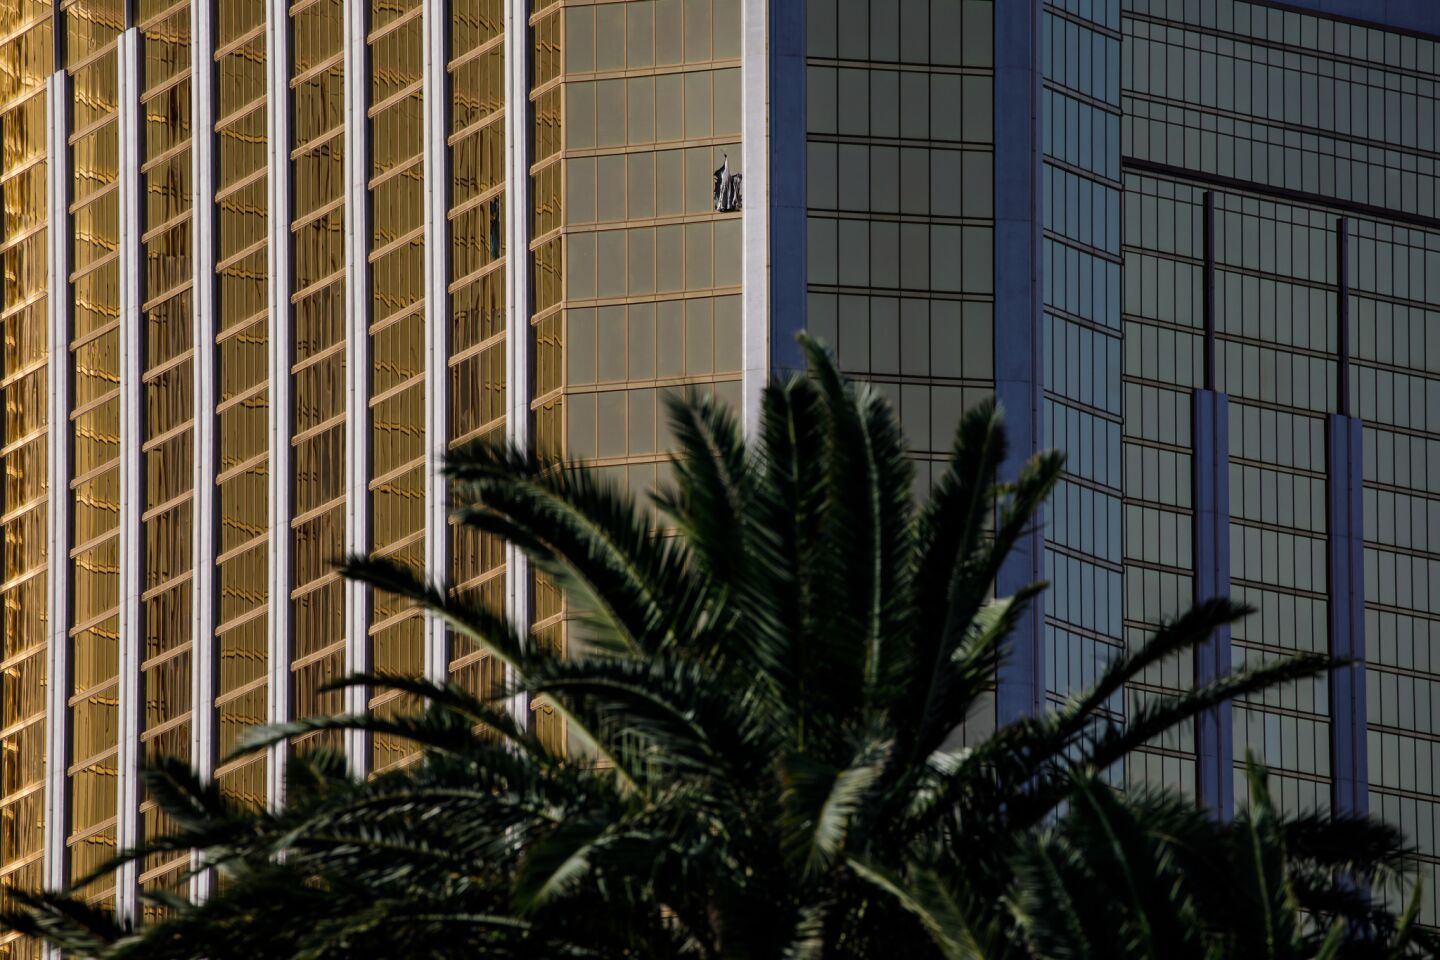 A curtain blows out of a broken window at the Mandalay Bay Resort and Casino, from where a gunman targeted a a country music festival across the street on the Las Vegas Strip on Sunday night.